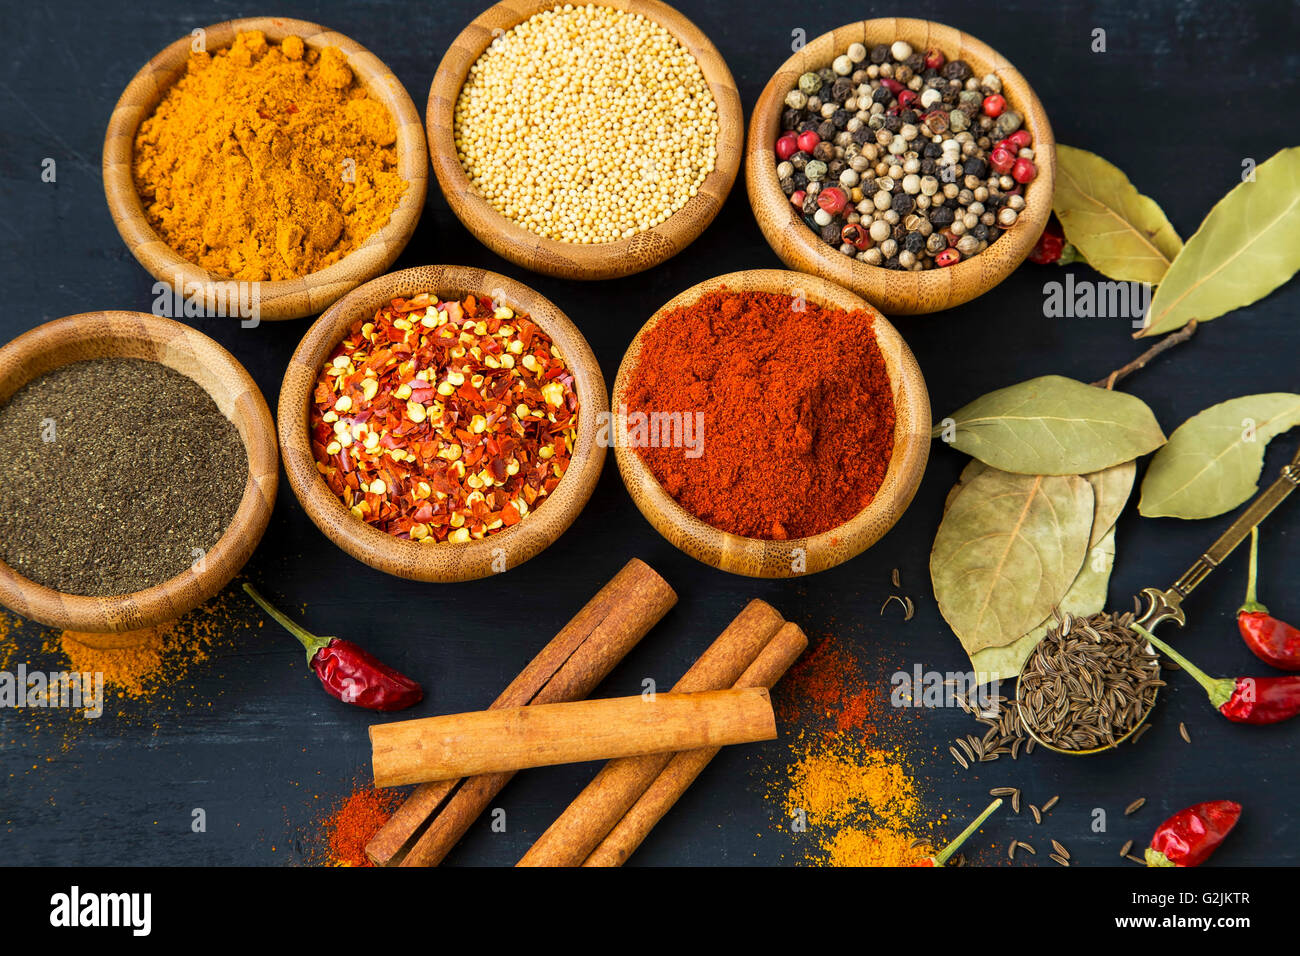 Spices powders and seeds with chili peppers and bay leaves Stock Photo